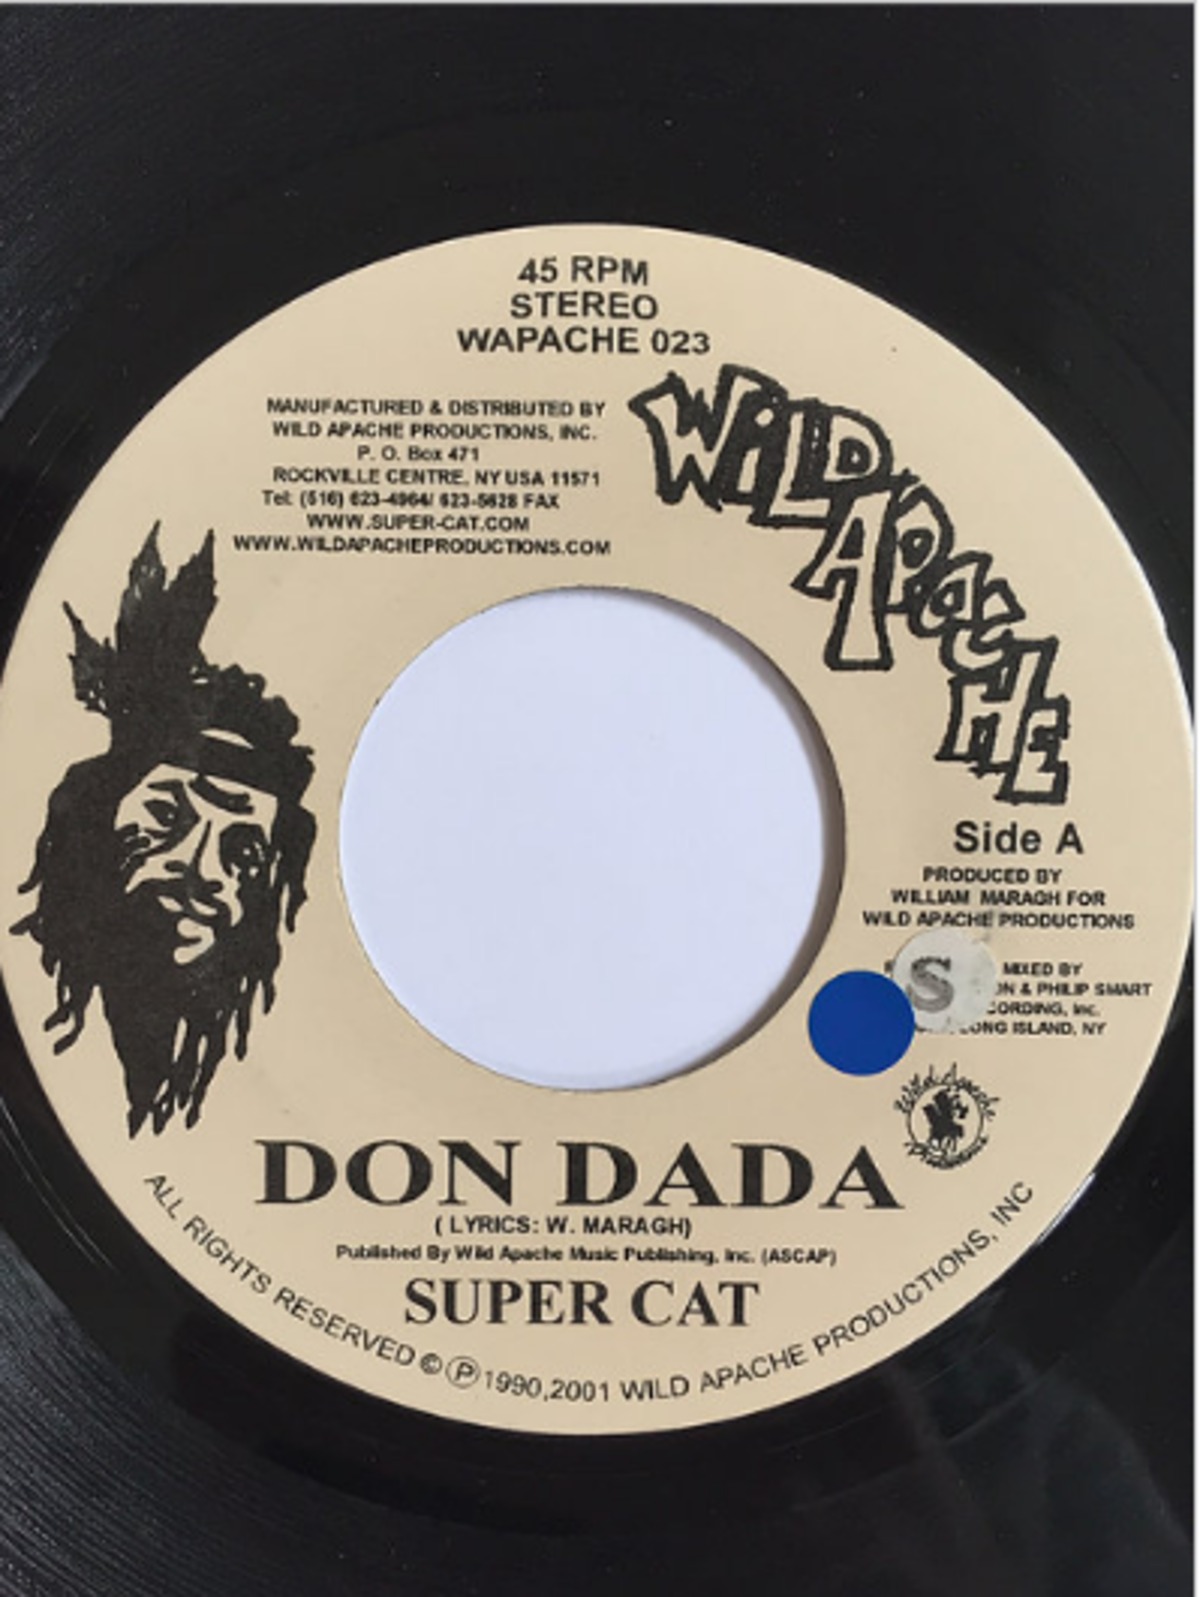 Super Cat（スーパーキャット） - Don Dada【7inch】 | Jamaican Soul powered by BASE